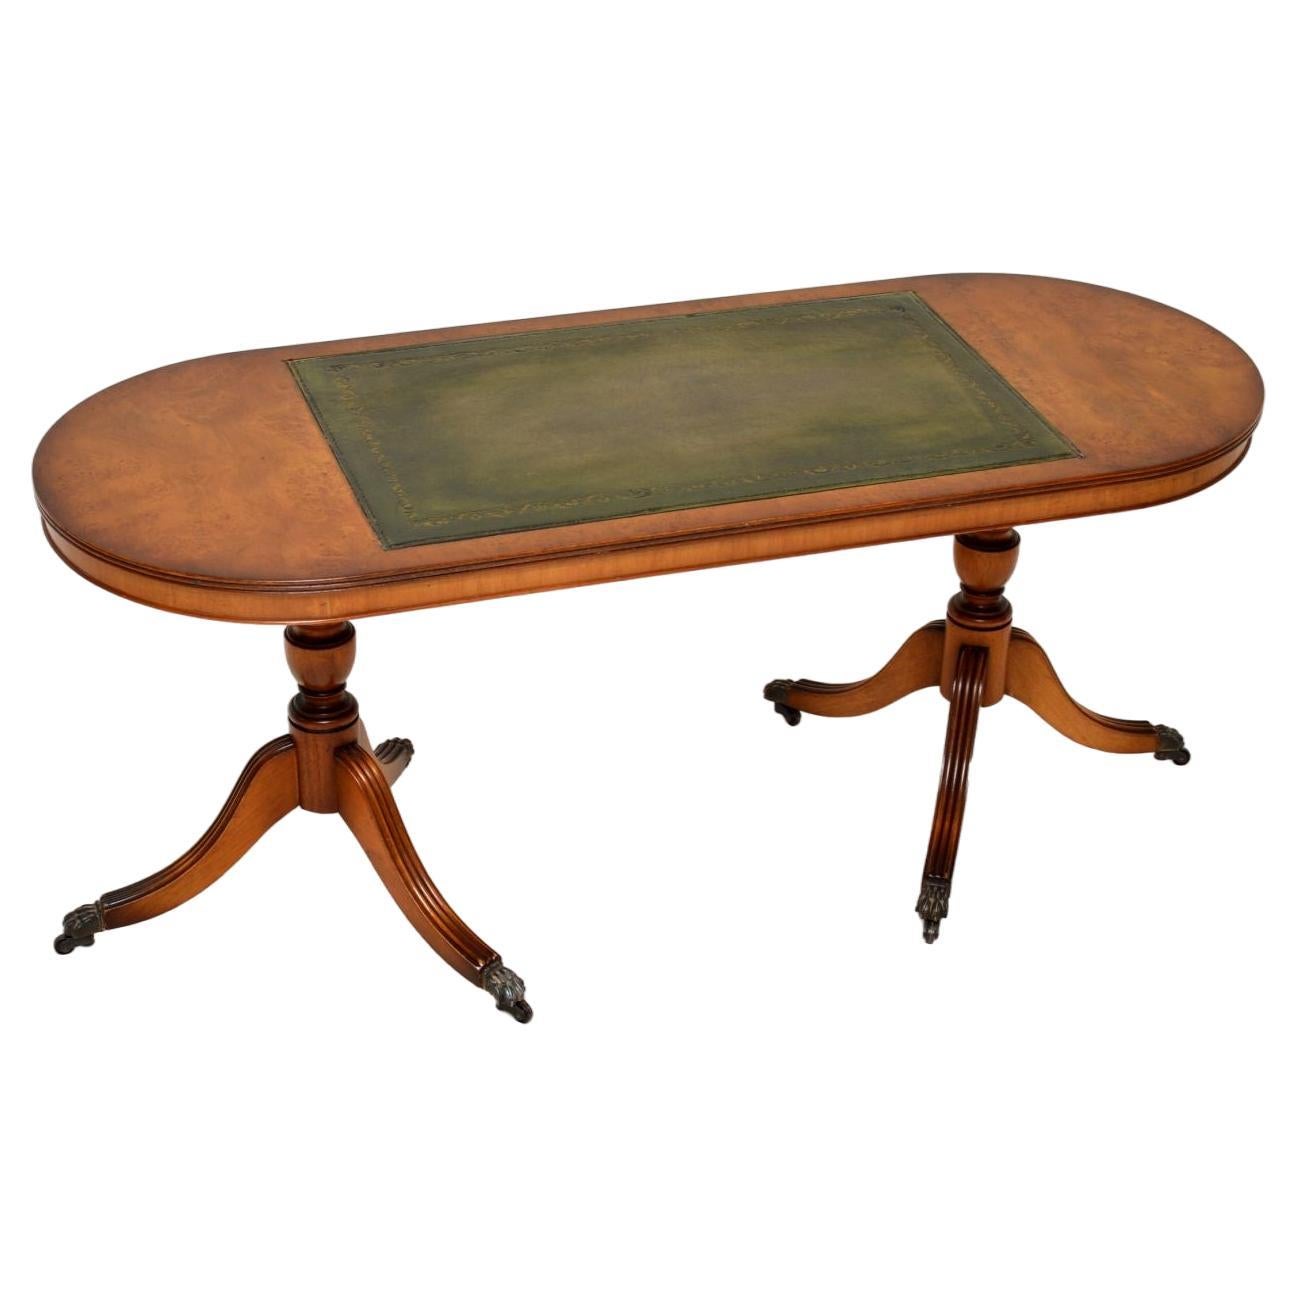 Antique Regency Style Walnut and Leather Coffee Table